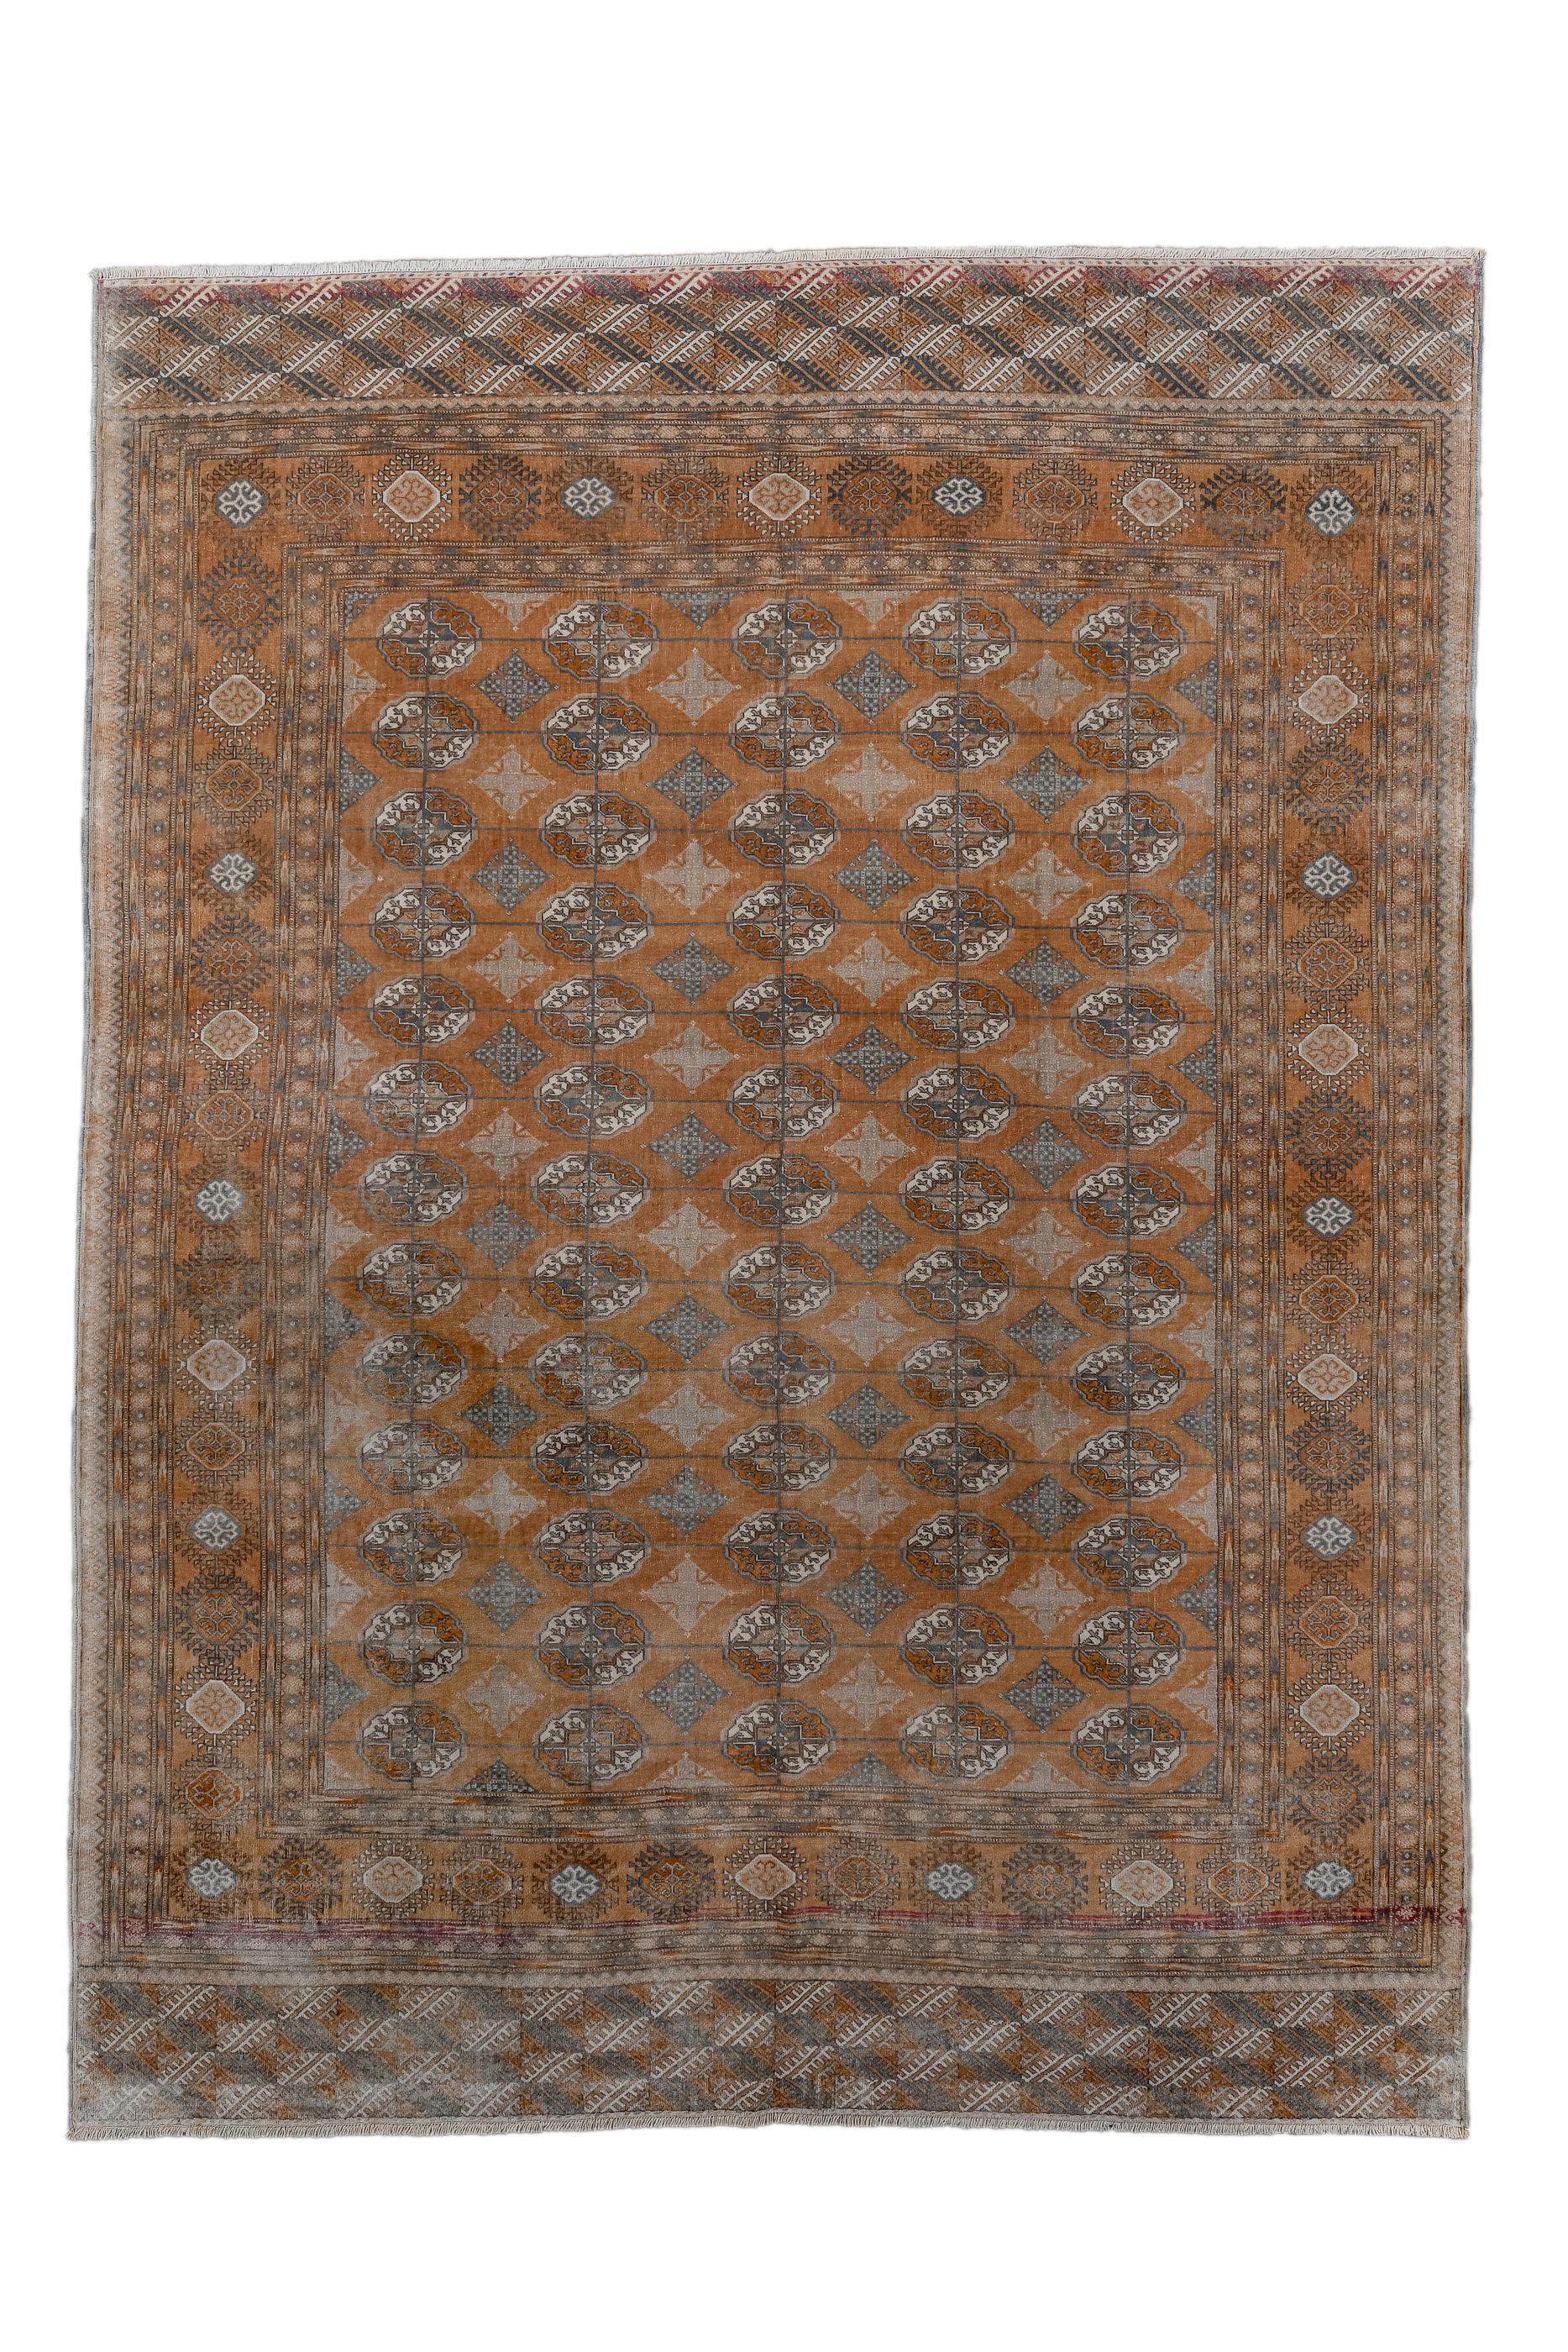 This Tekke tribal rug displays five columns of quartered emblematic ovoid tribal guls, with cruciform lozenge Kurbaghe minors set between, all on a red-rust ground. The wide main border is also in red and shows rayed, stellate medallions, enclosing